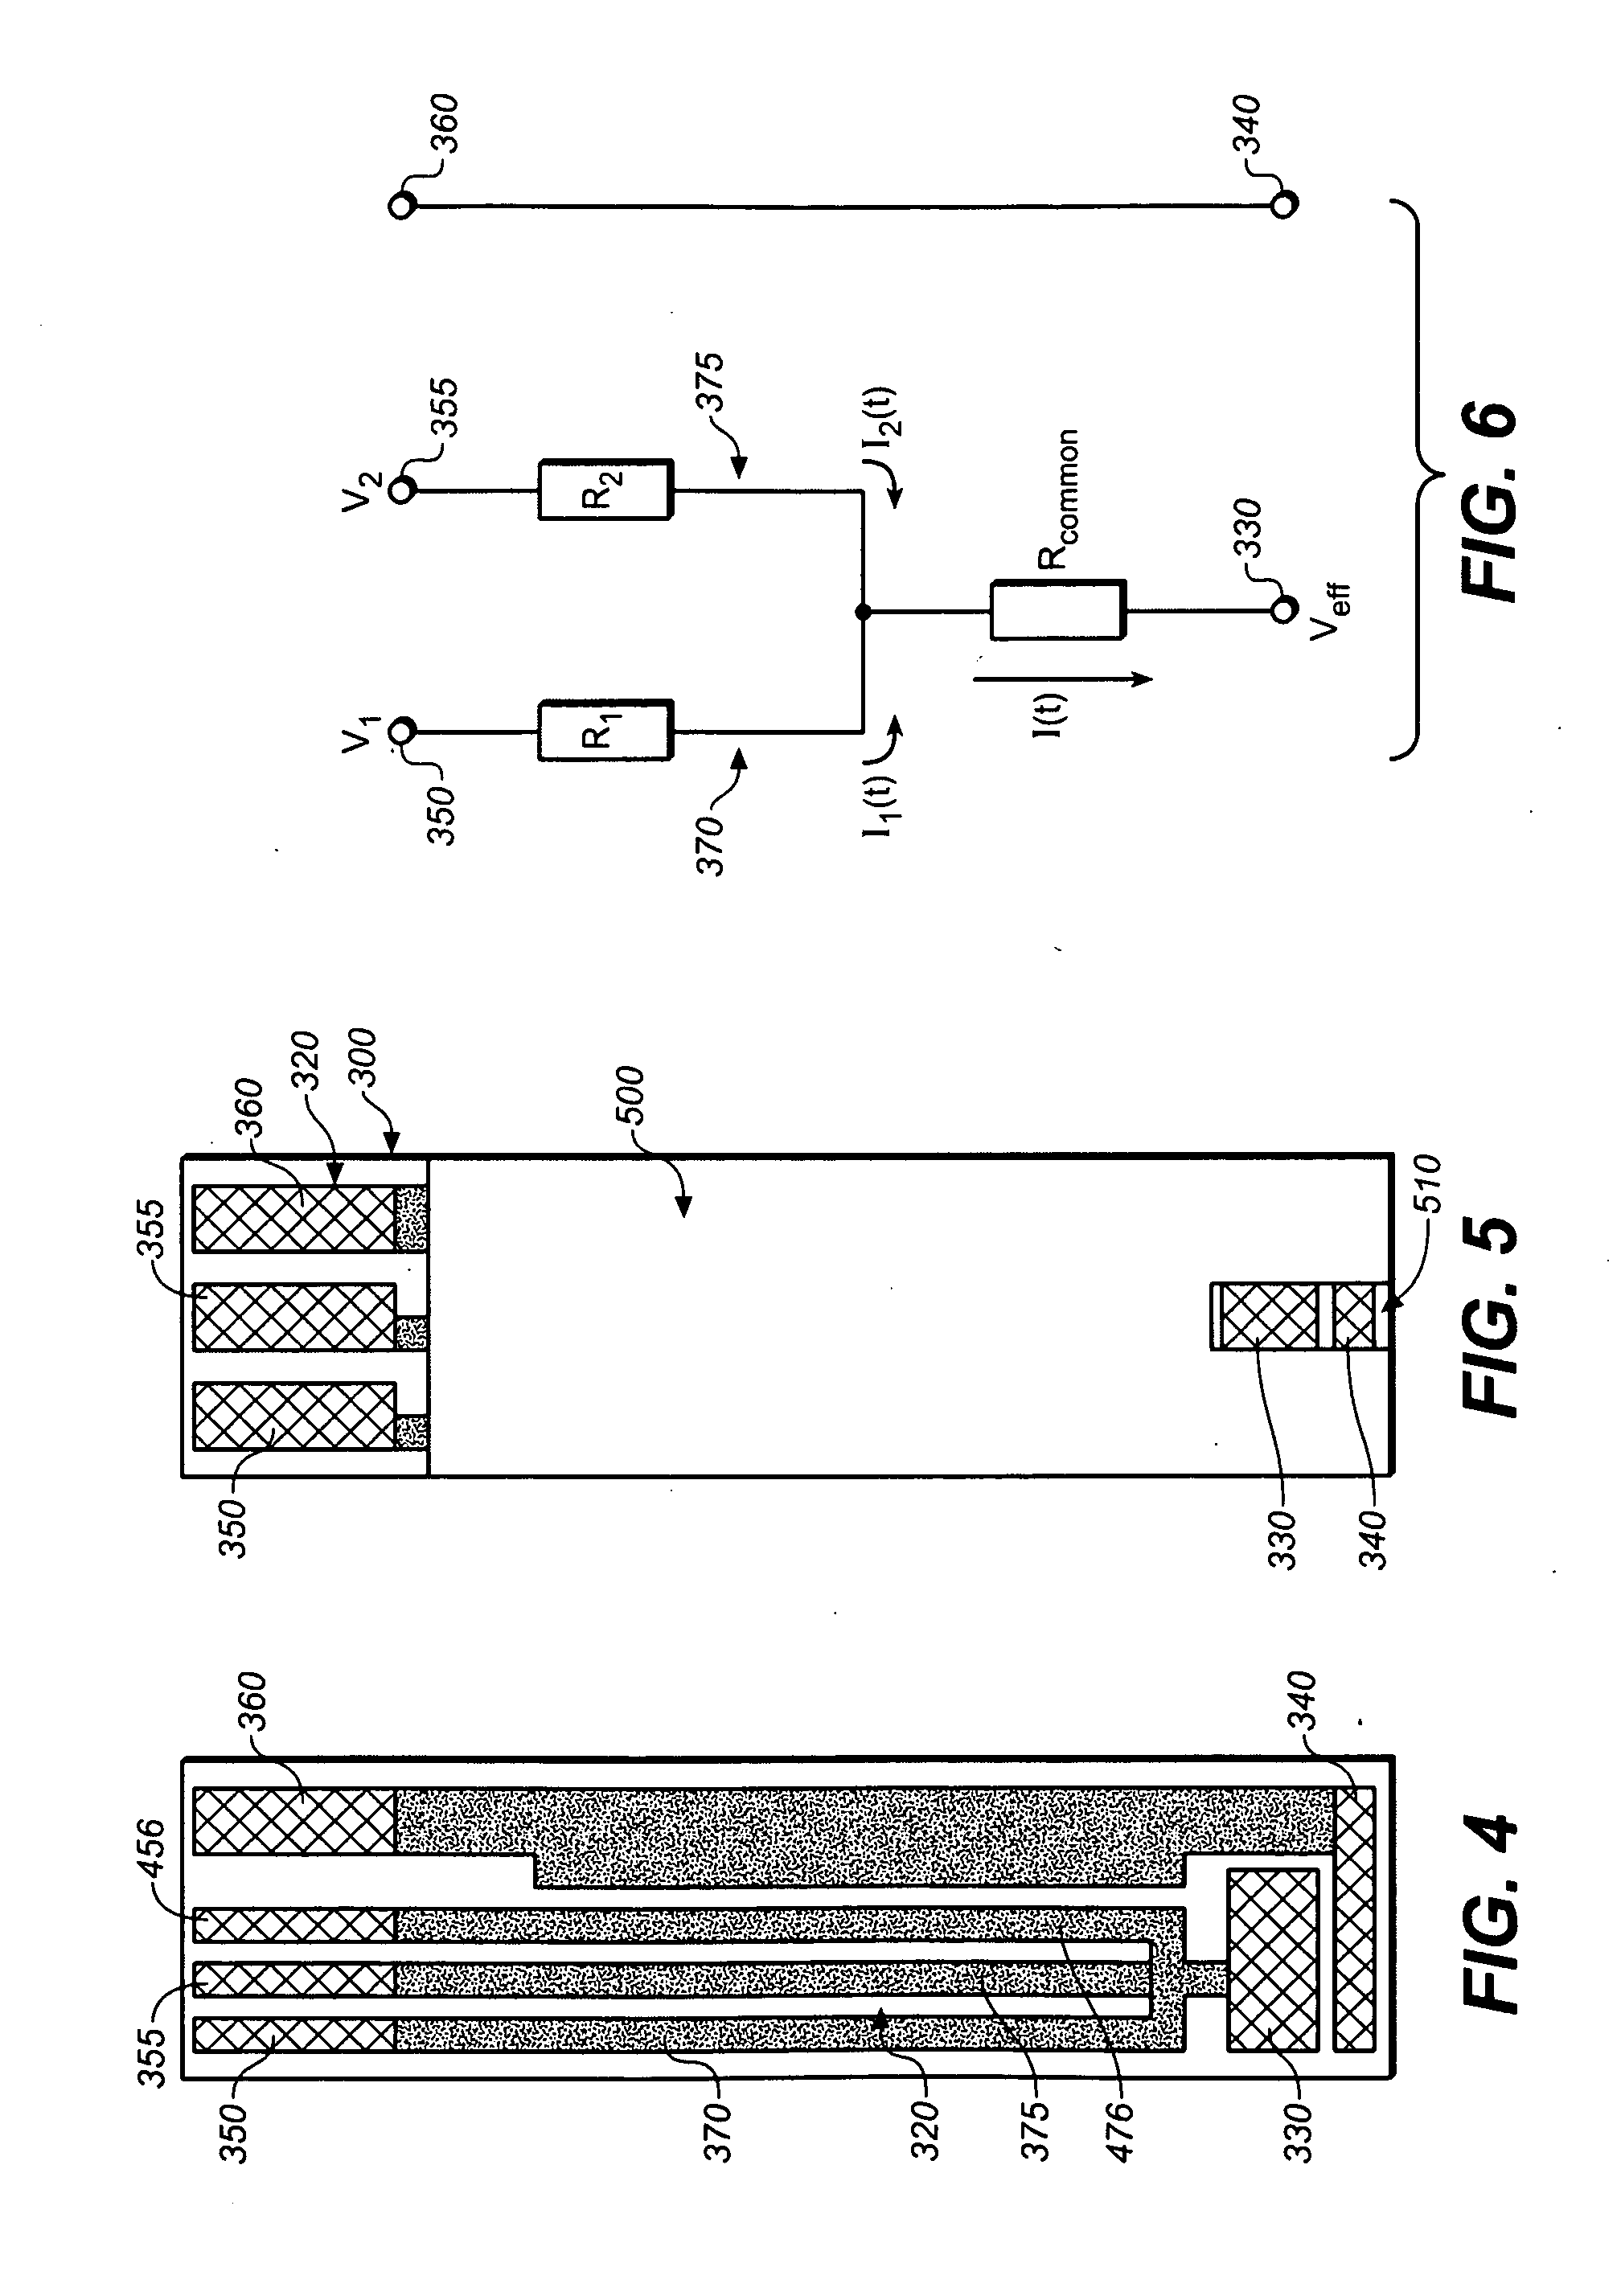 Electrochemical strip for use with a multi-input meter